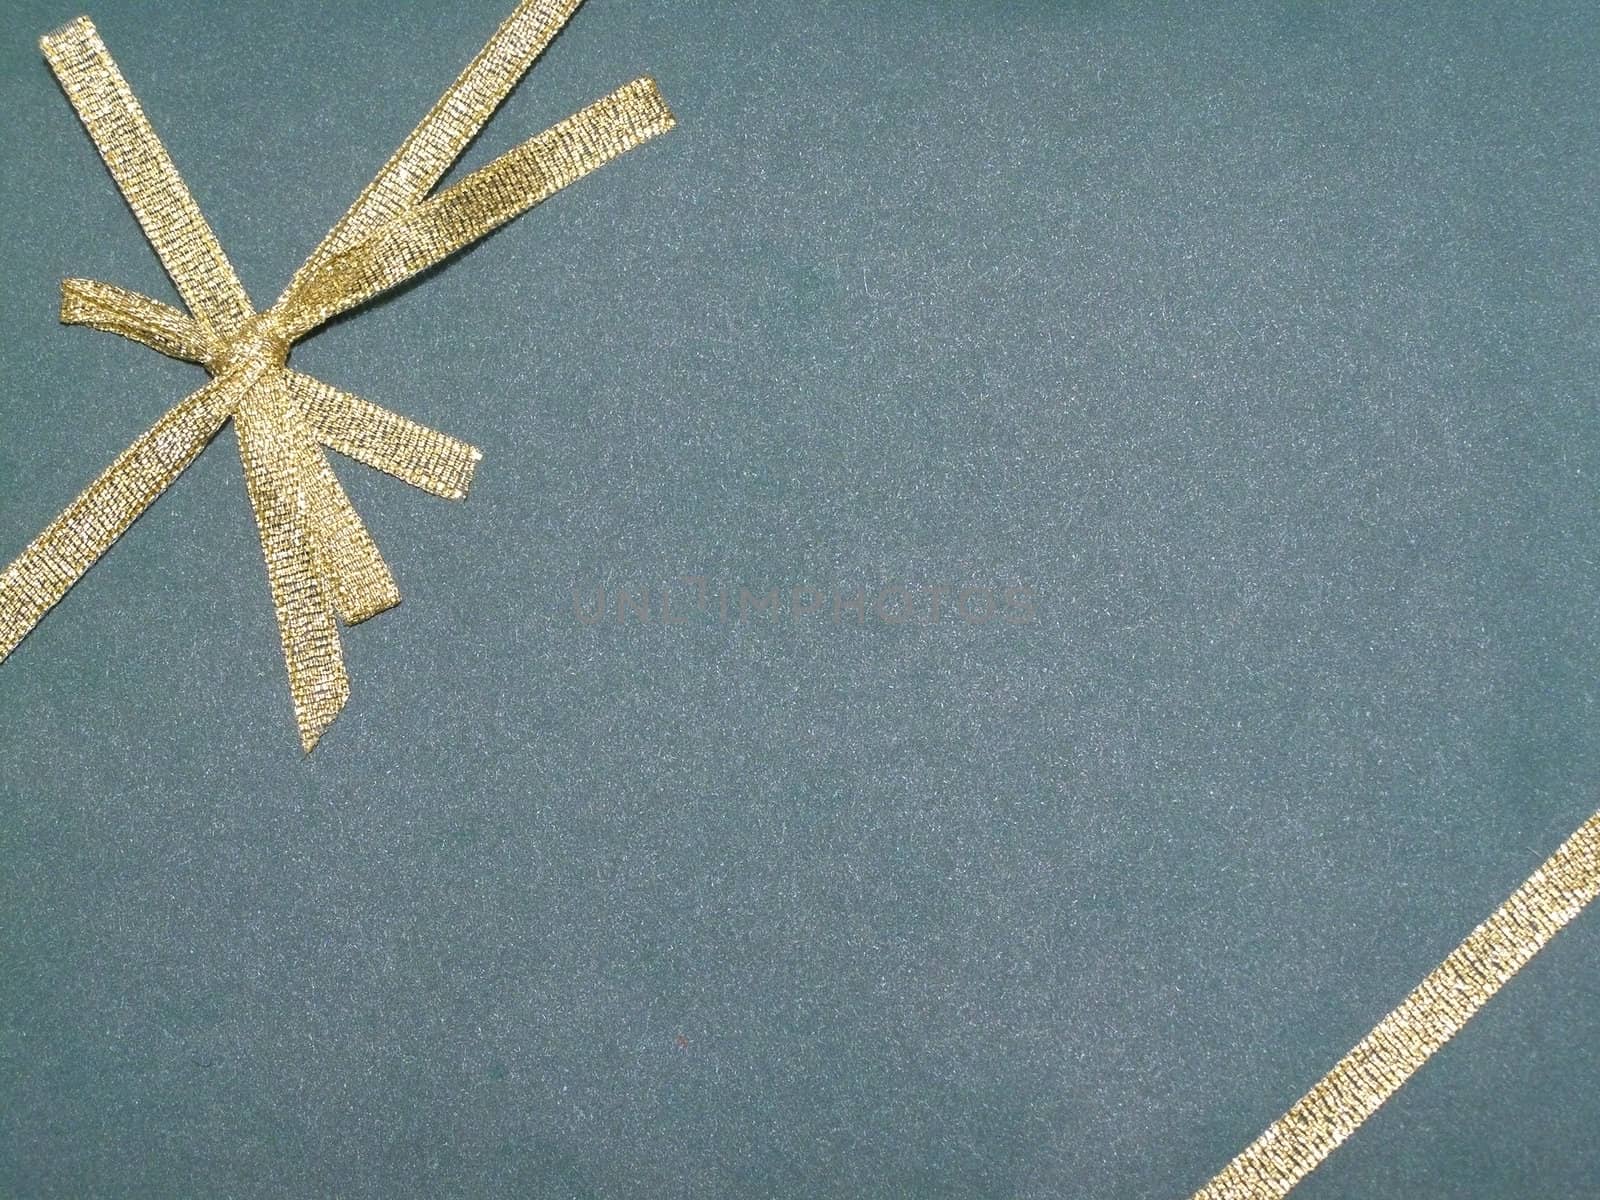 top of gift with golden tie in a bow 